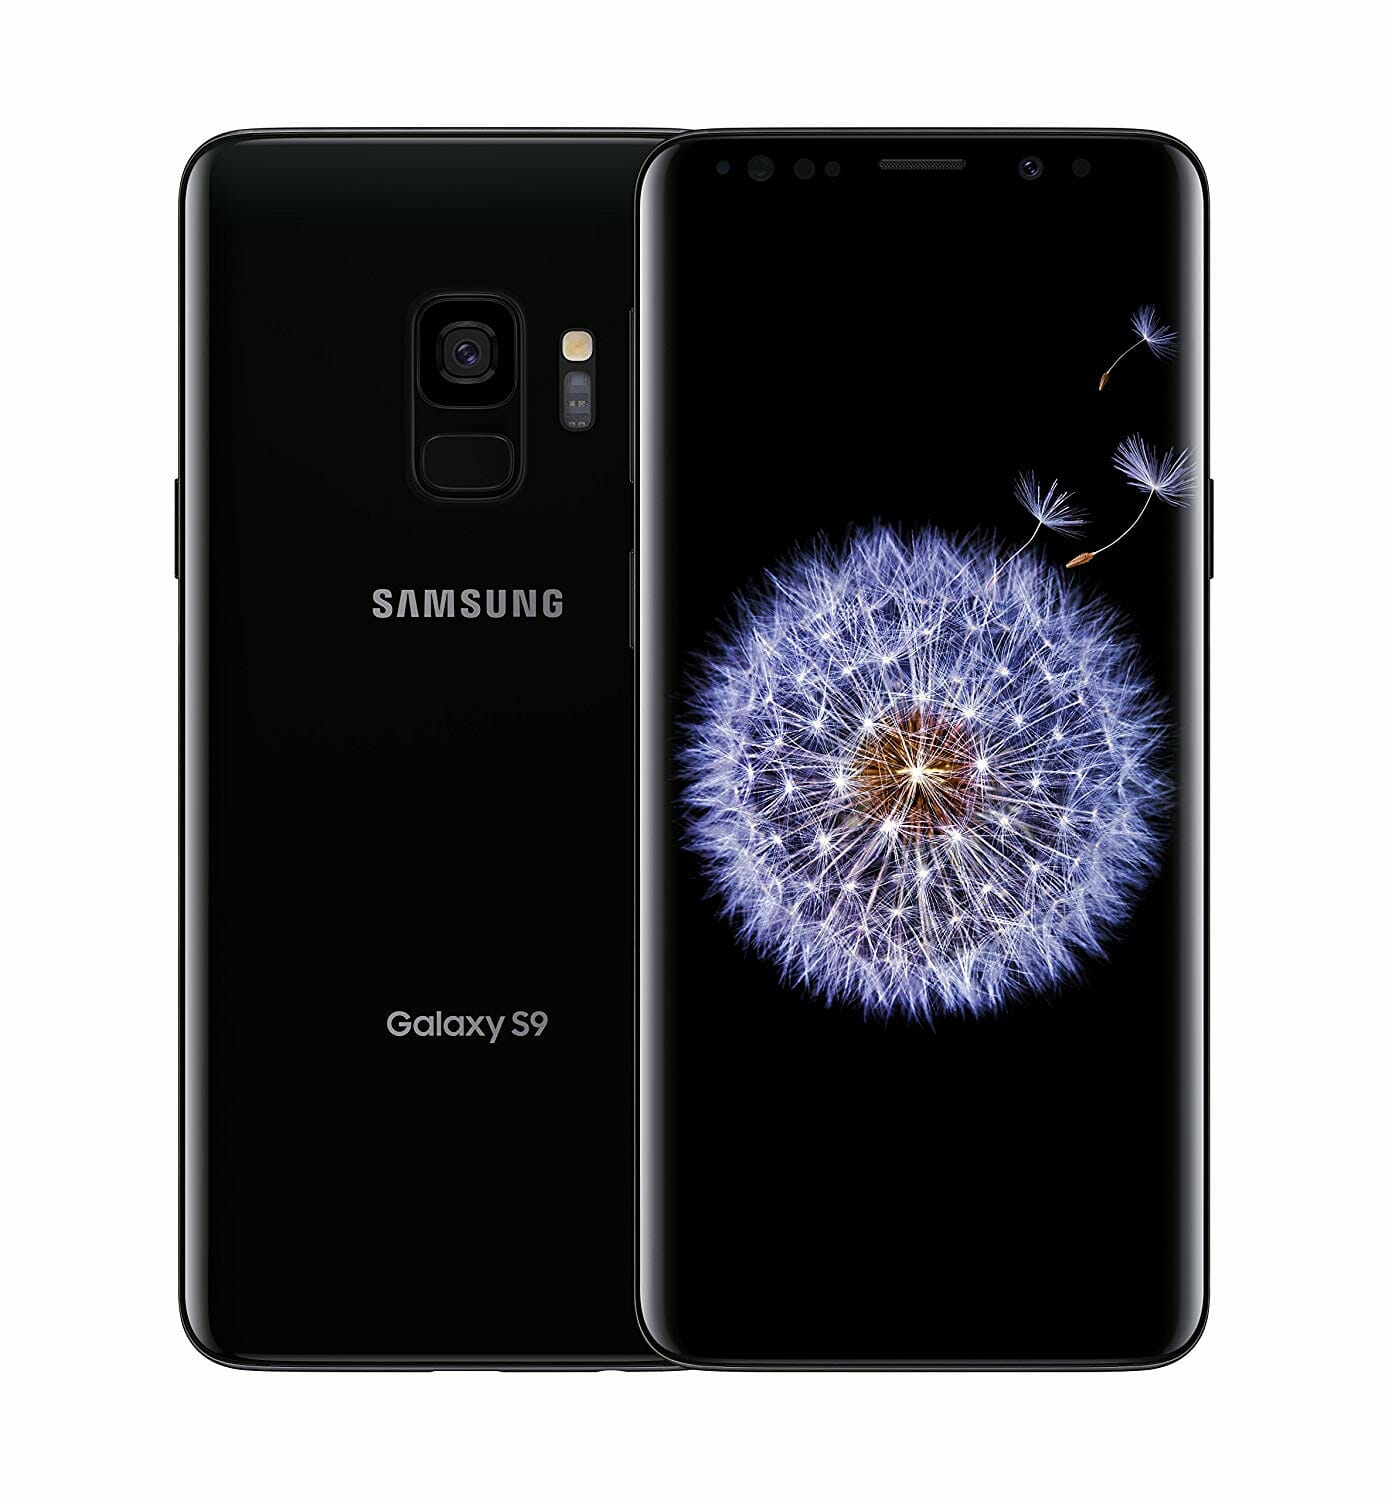 Samsung Galaxy S9 -Why should you buy it?